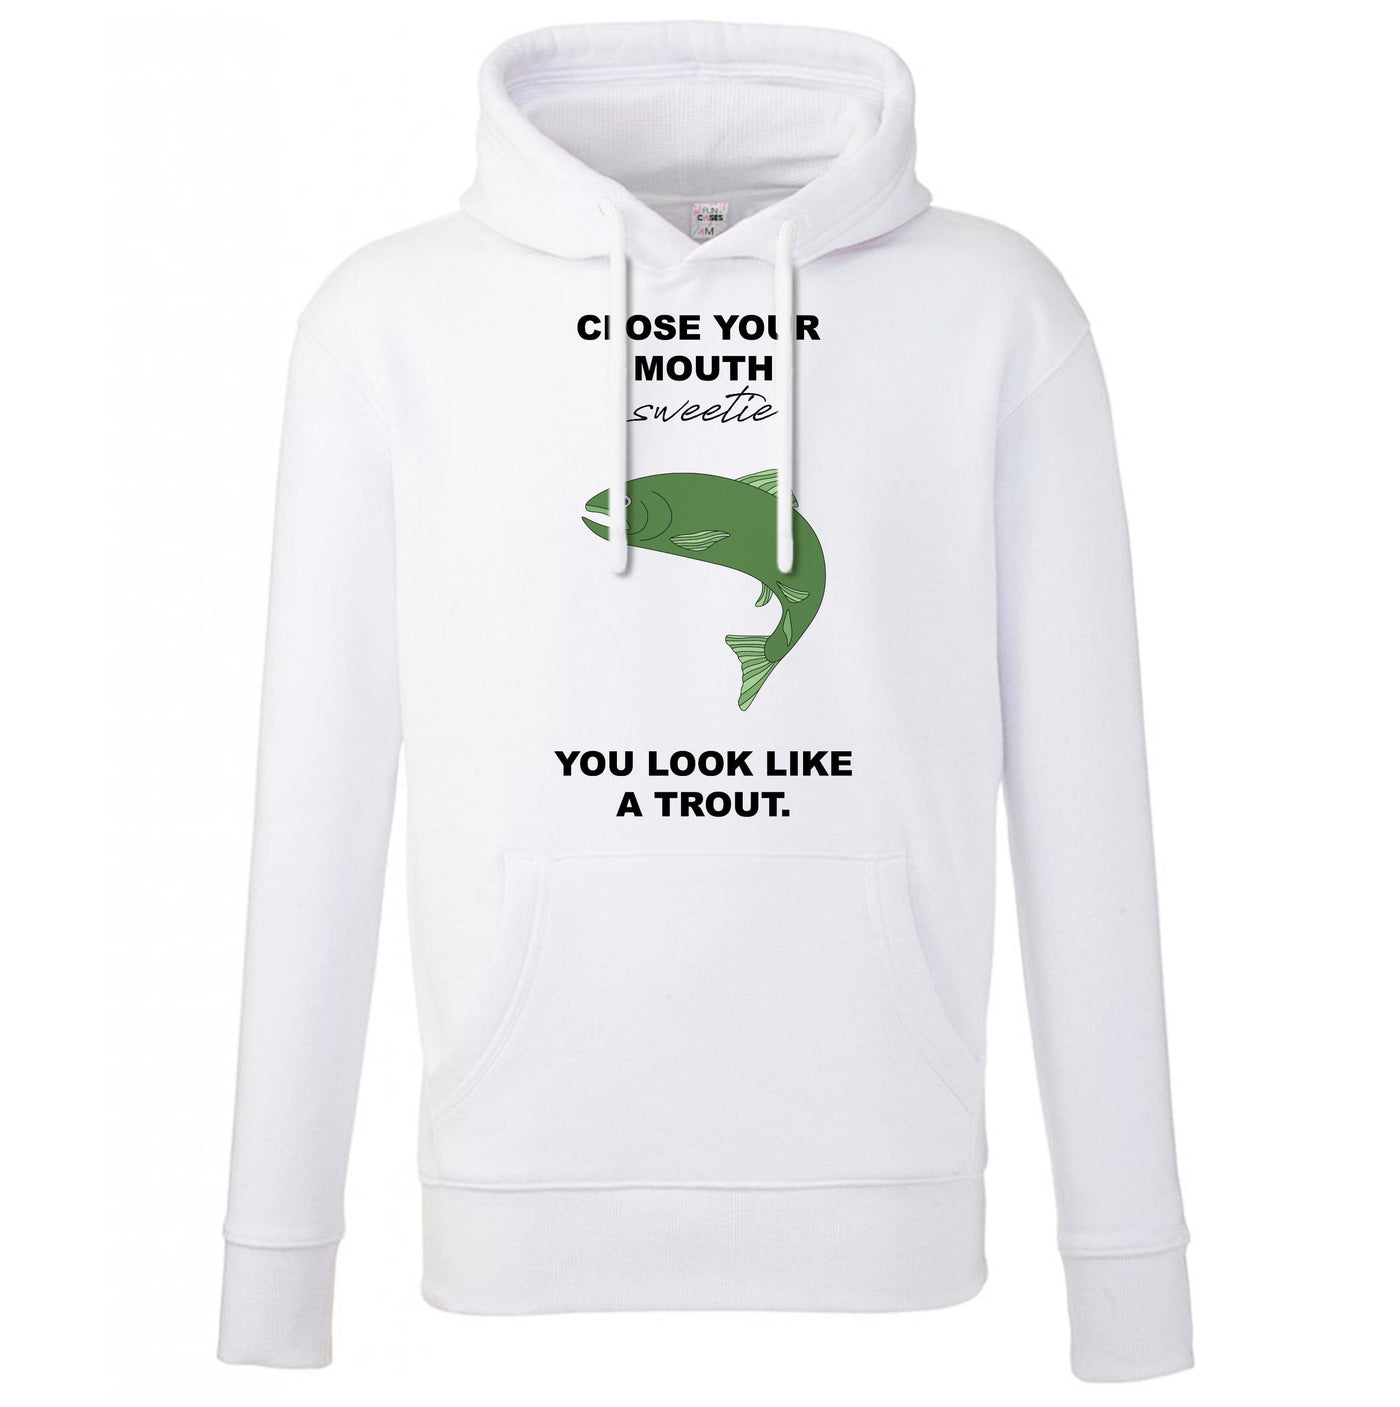 Close Your Mouth - The Office Hoodie